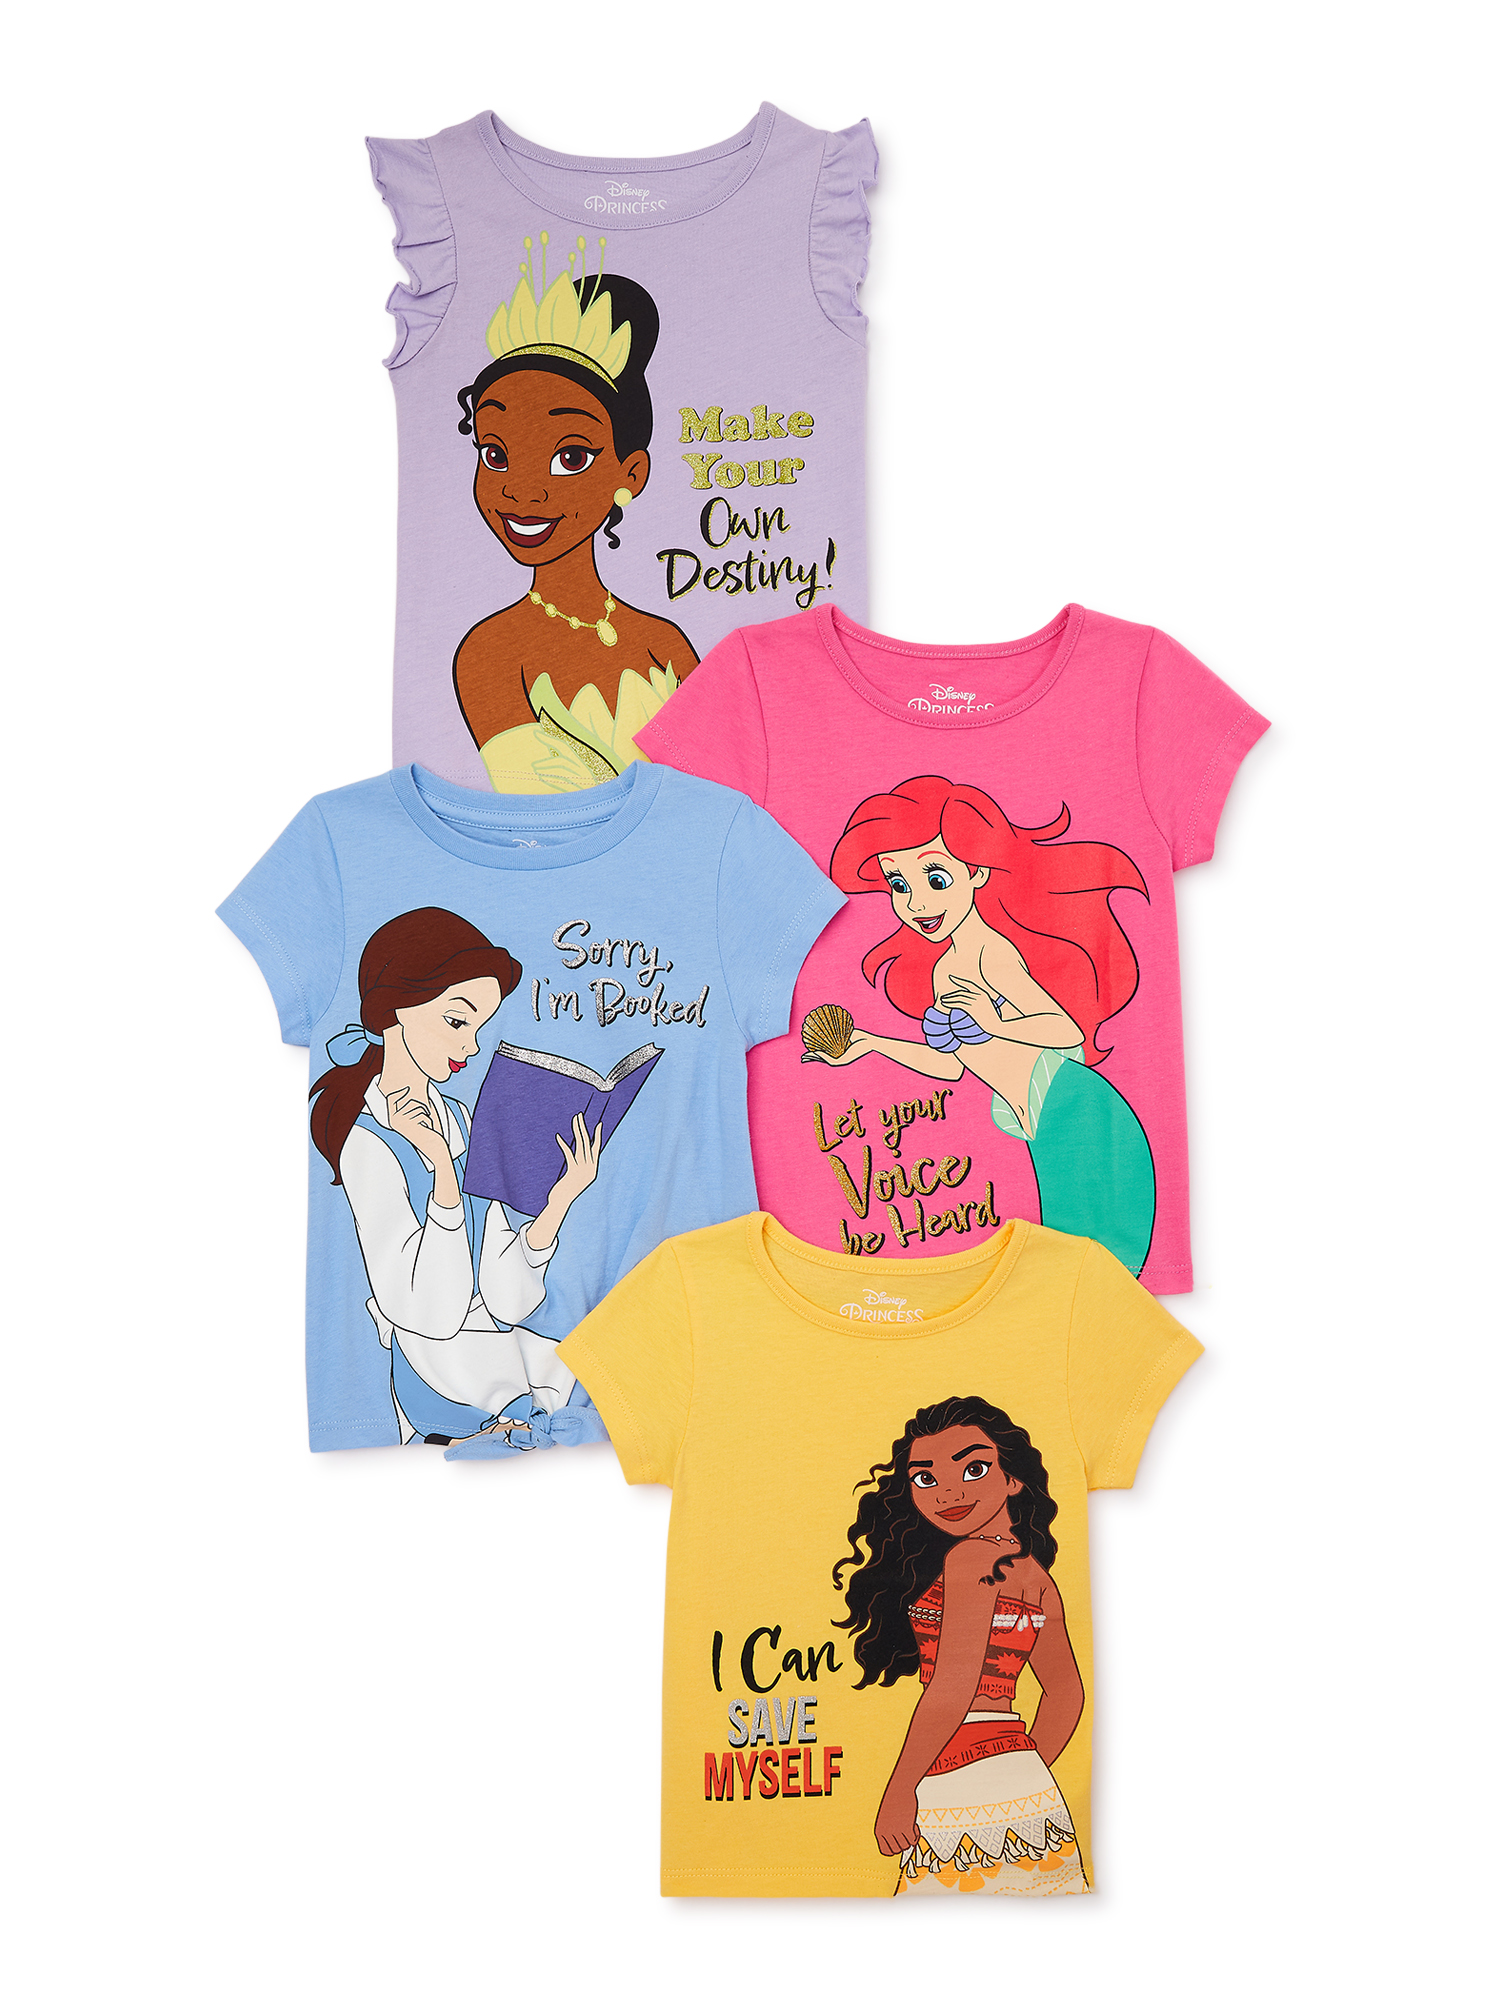 Disney Princess Toddler Girls Fashion T-Shirts with Short Sleeves, 4-Pack, Sizes 2T-5T - image 1 of 9